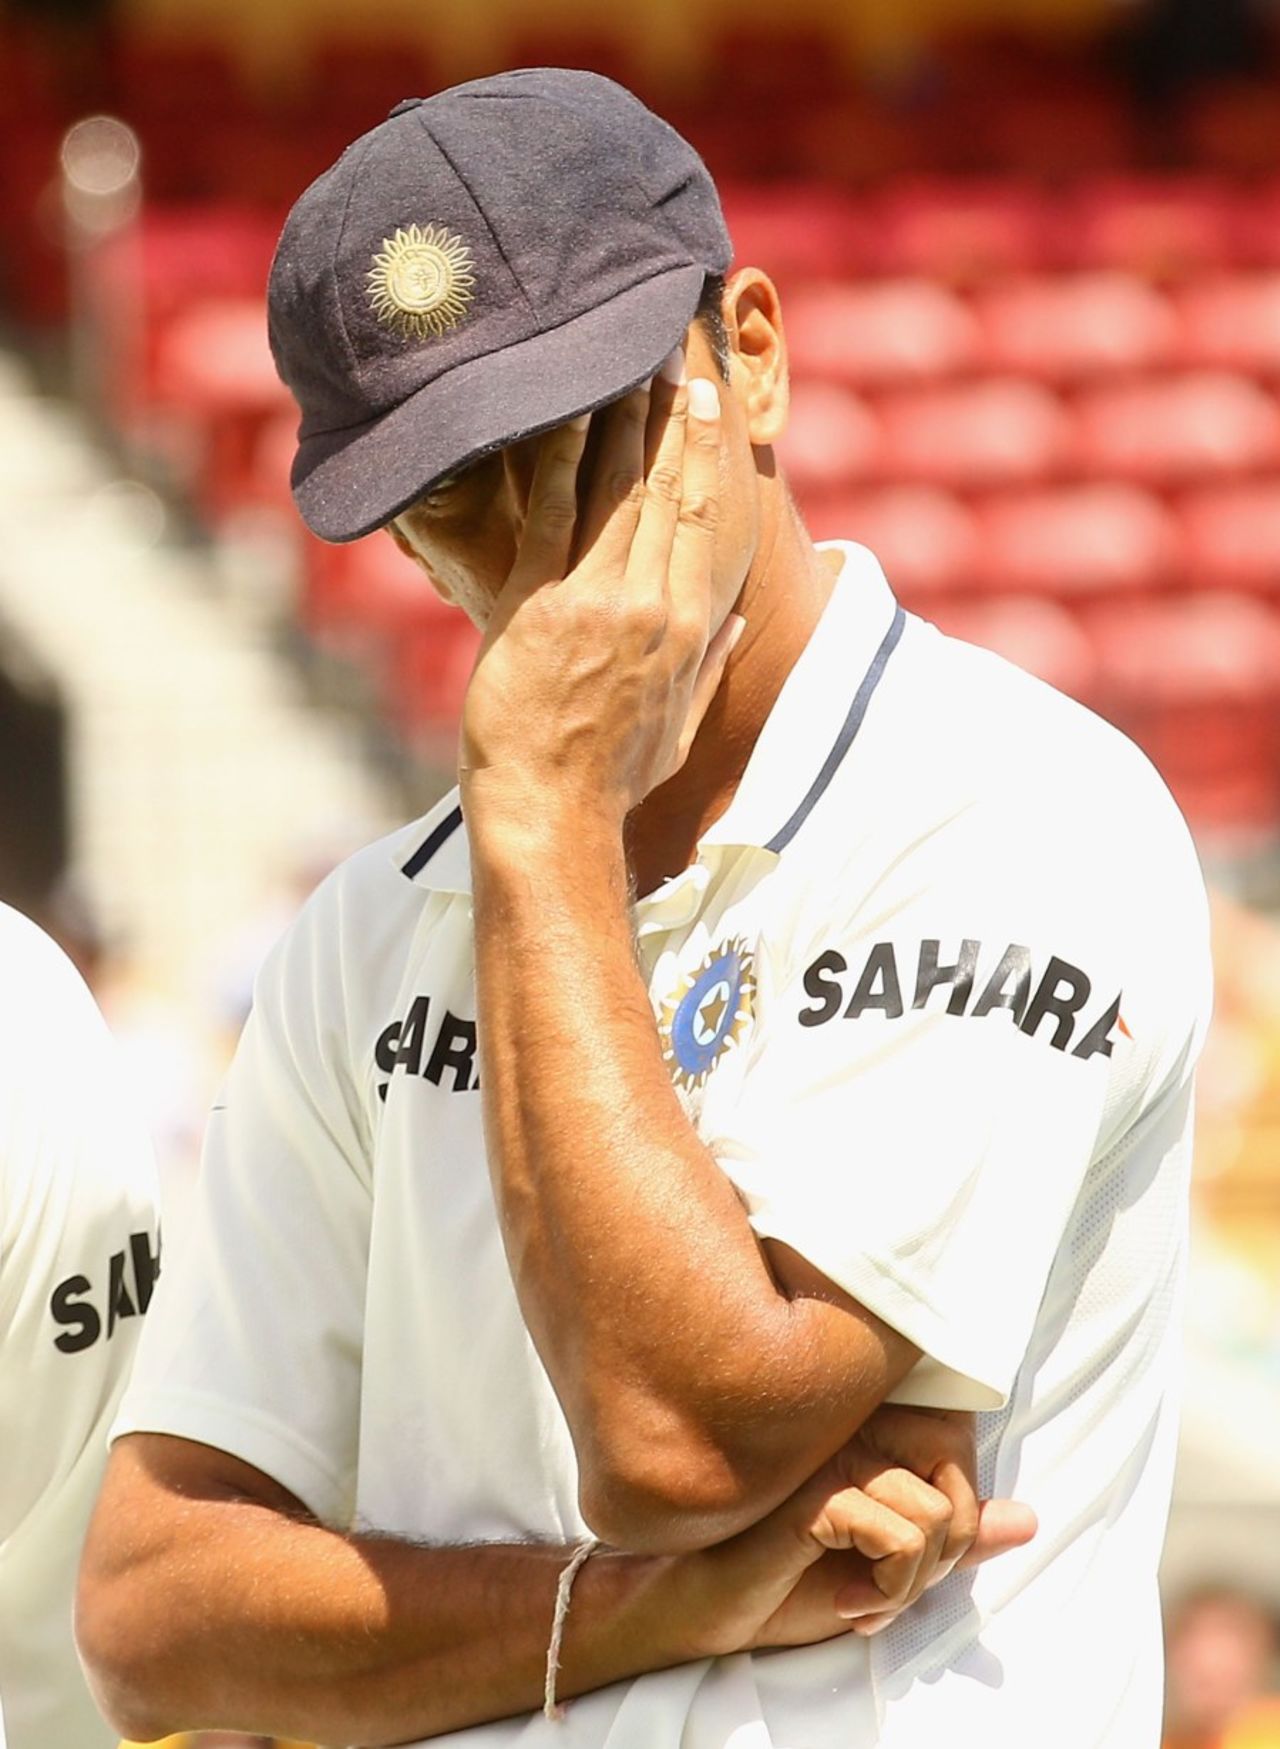 Rahul Dravid at the post-match presentation, 4th Test, Adelaide, 5th day, January 28, 2012